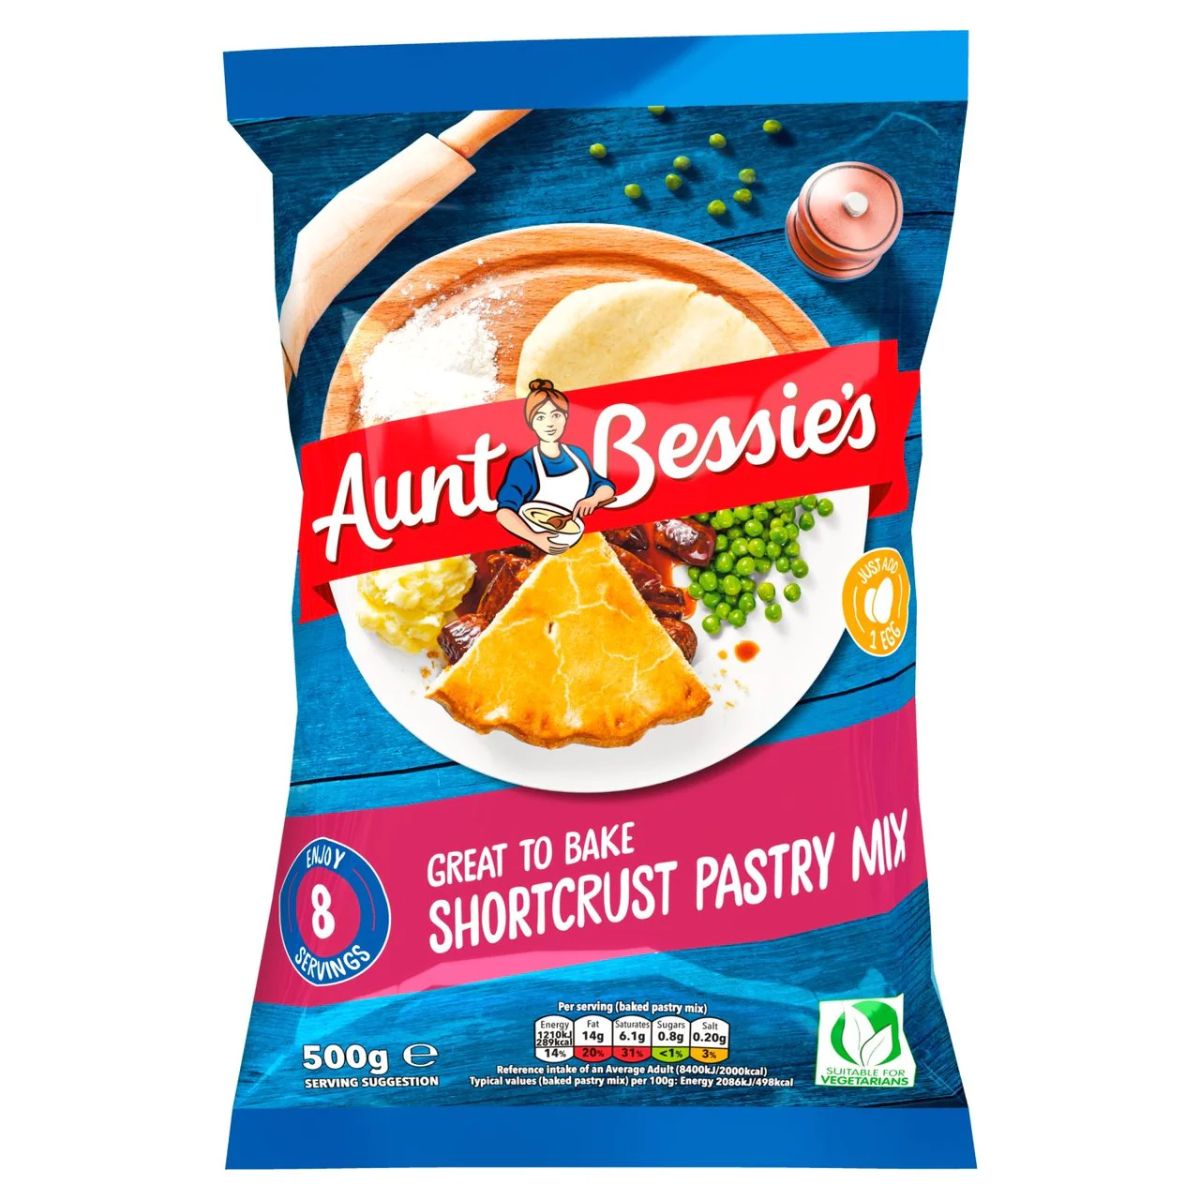 A bag of Aunt Bessies - Shortcrust Pastry Mix - 500g.